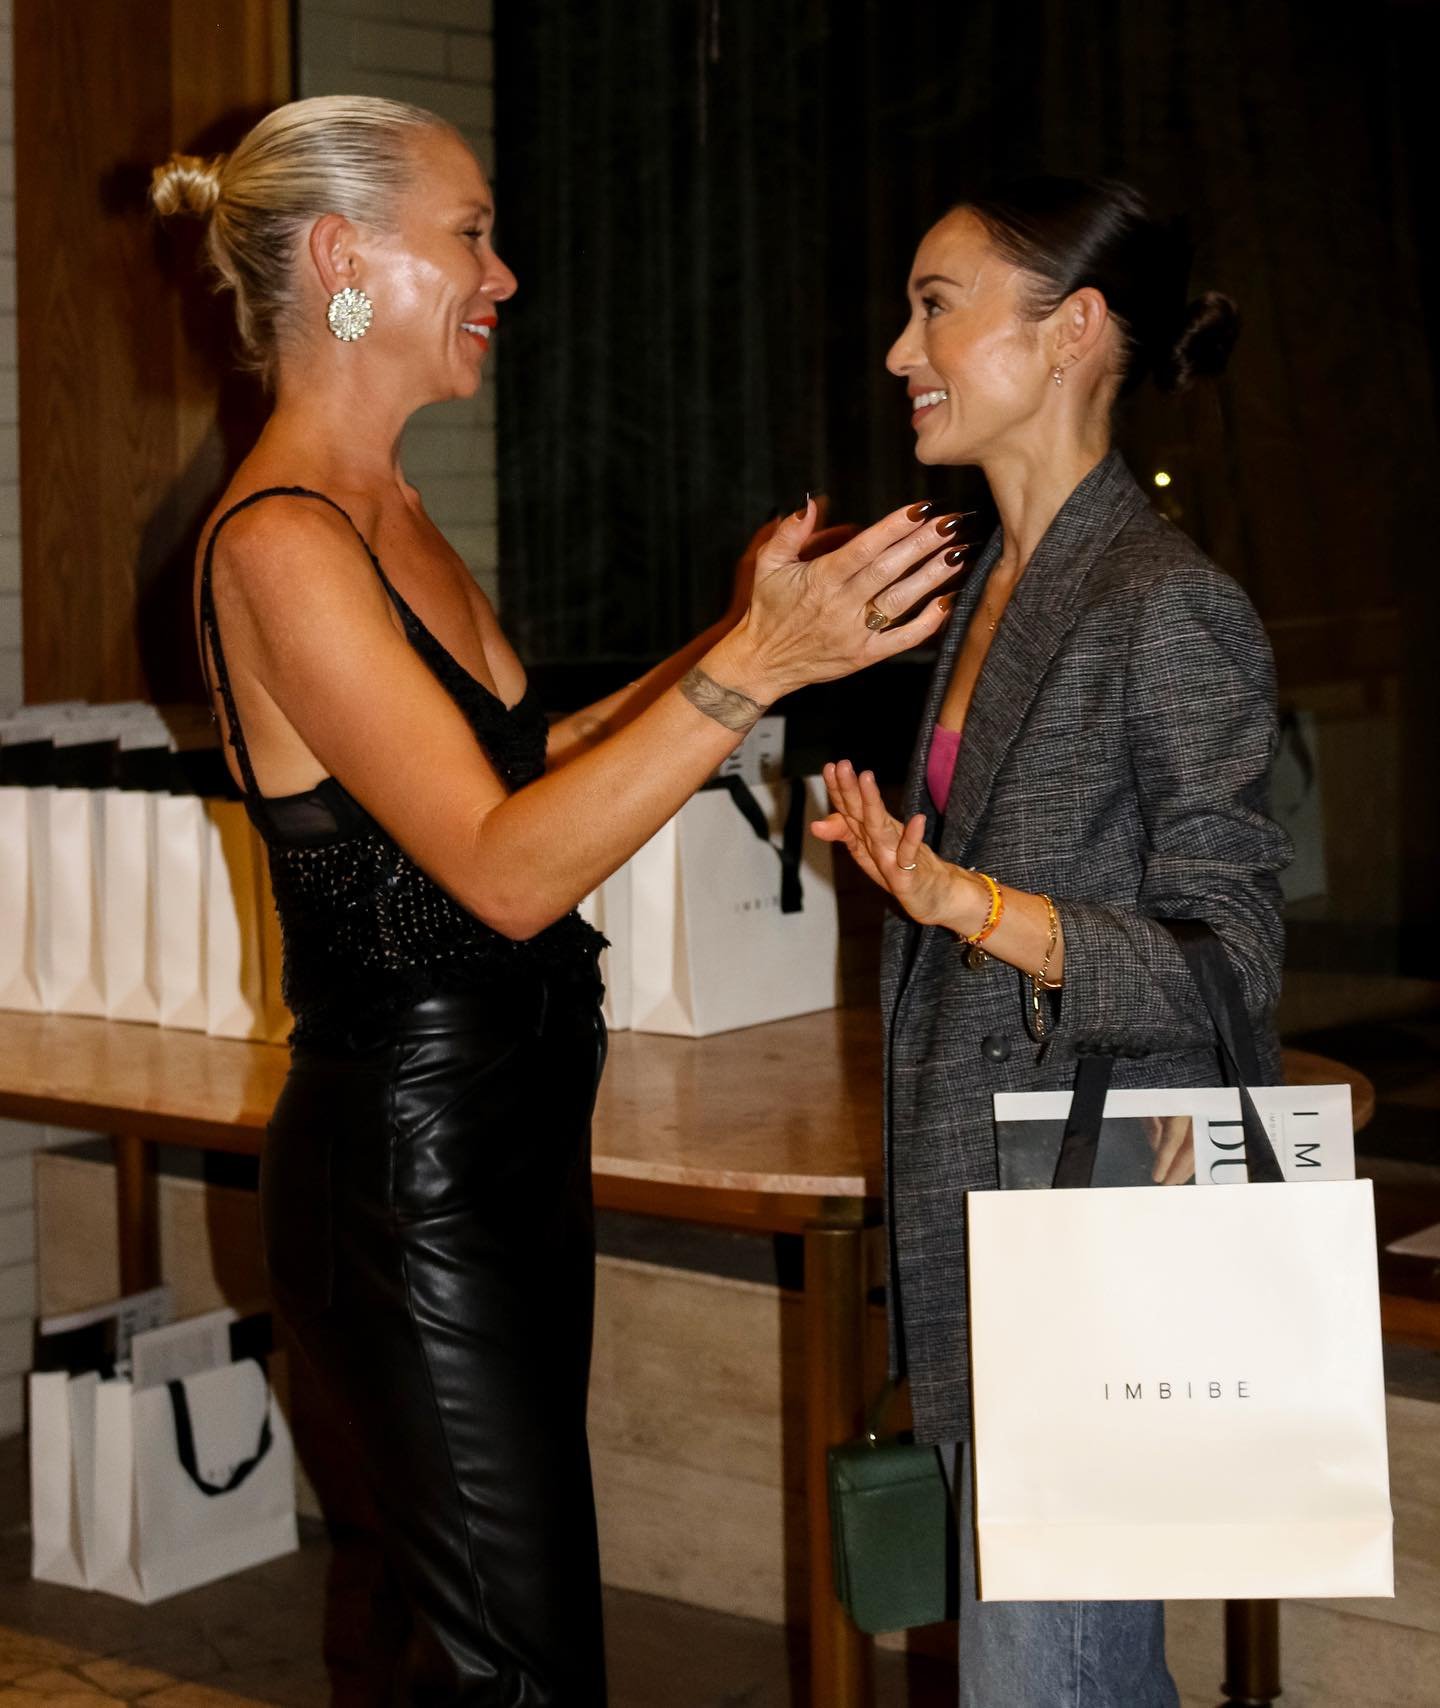 I had the pleasure of being a guest at IMBIBE&rsquo;s evening of holistic beauty at the Calile where founder + CEO @thefelicityevans with Dr Jemma Buultjens @vaemedical discussed the intersection of &ldquo;Clean and Clinical&rdquo; followed by Q&amp;